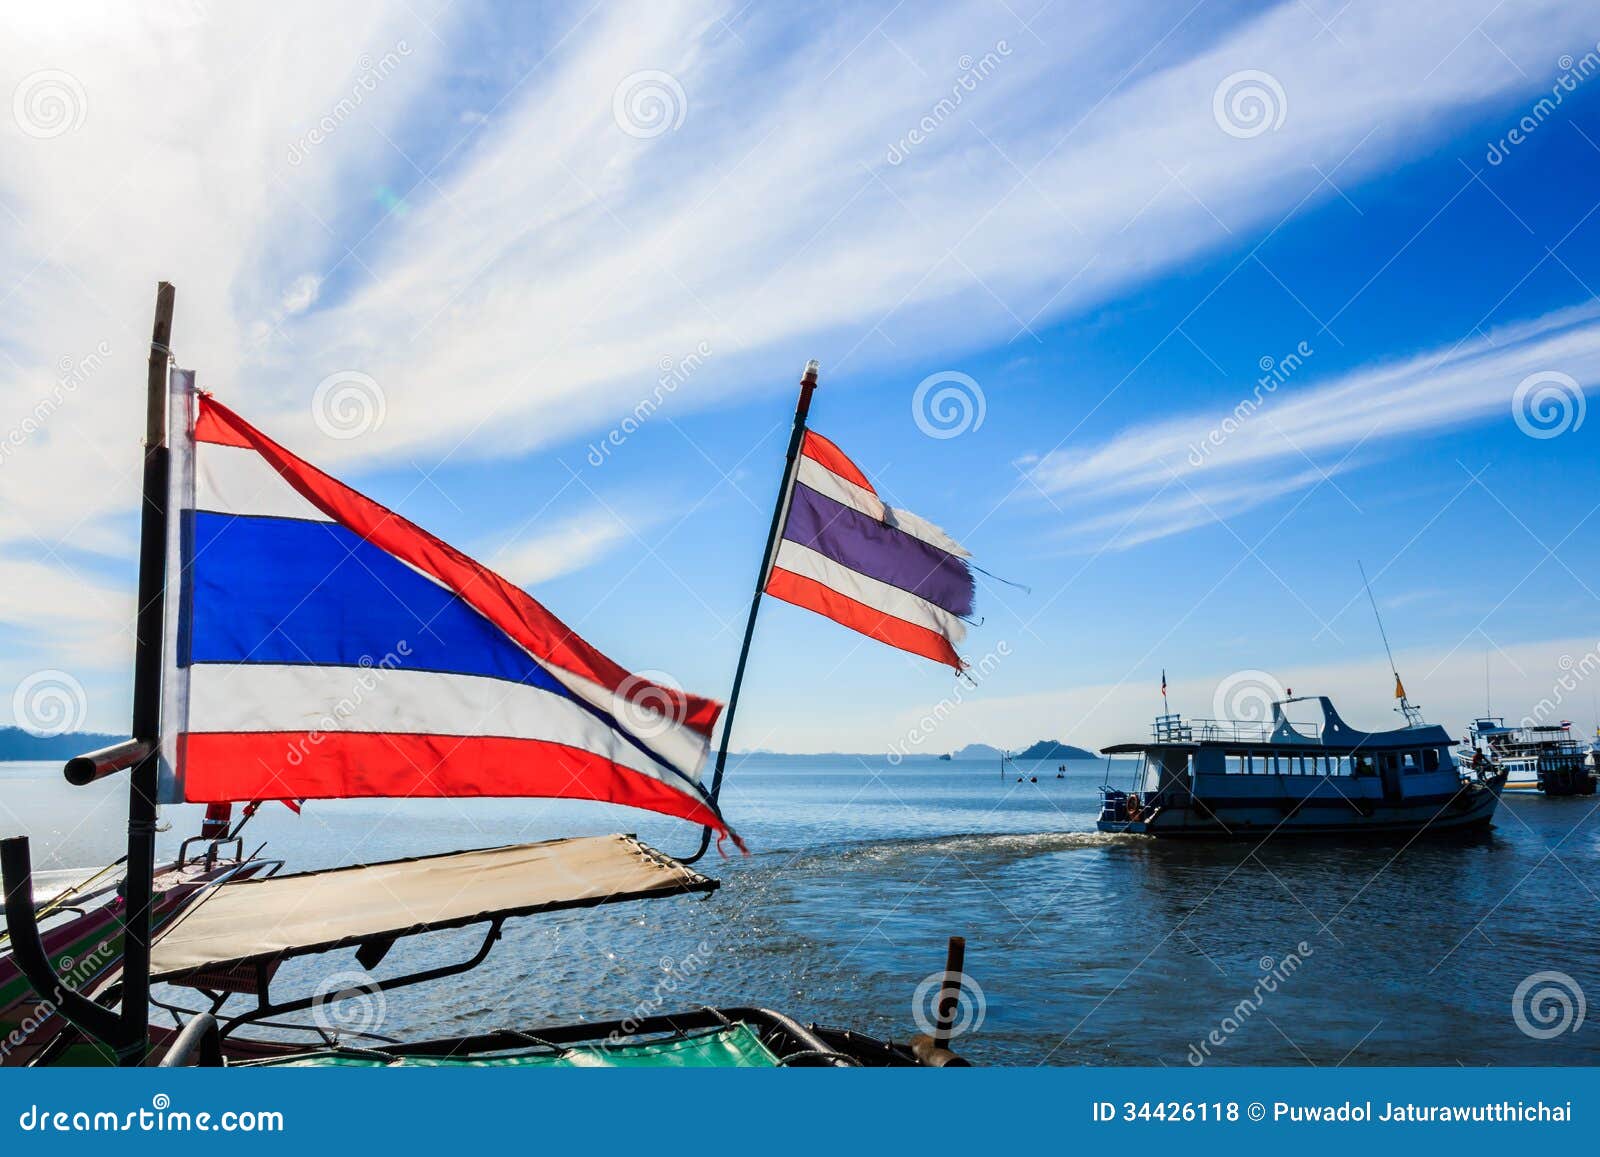 Thai Flags On Boat Royalty Free Stock Photos - Image: 34426118